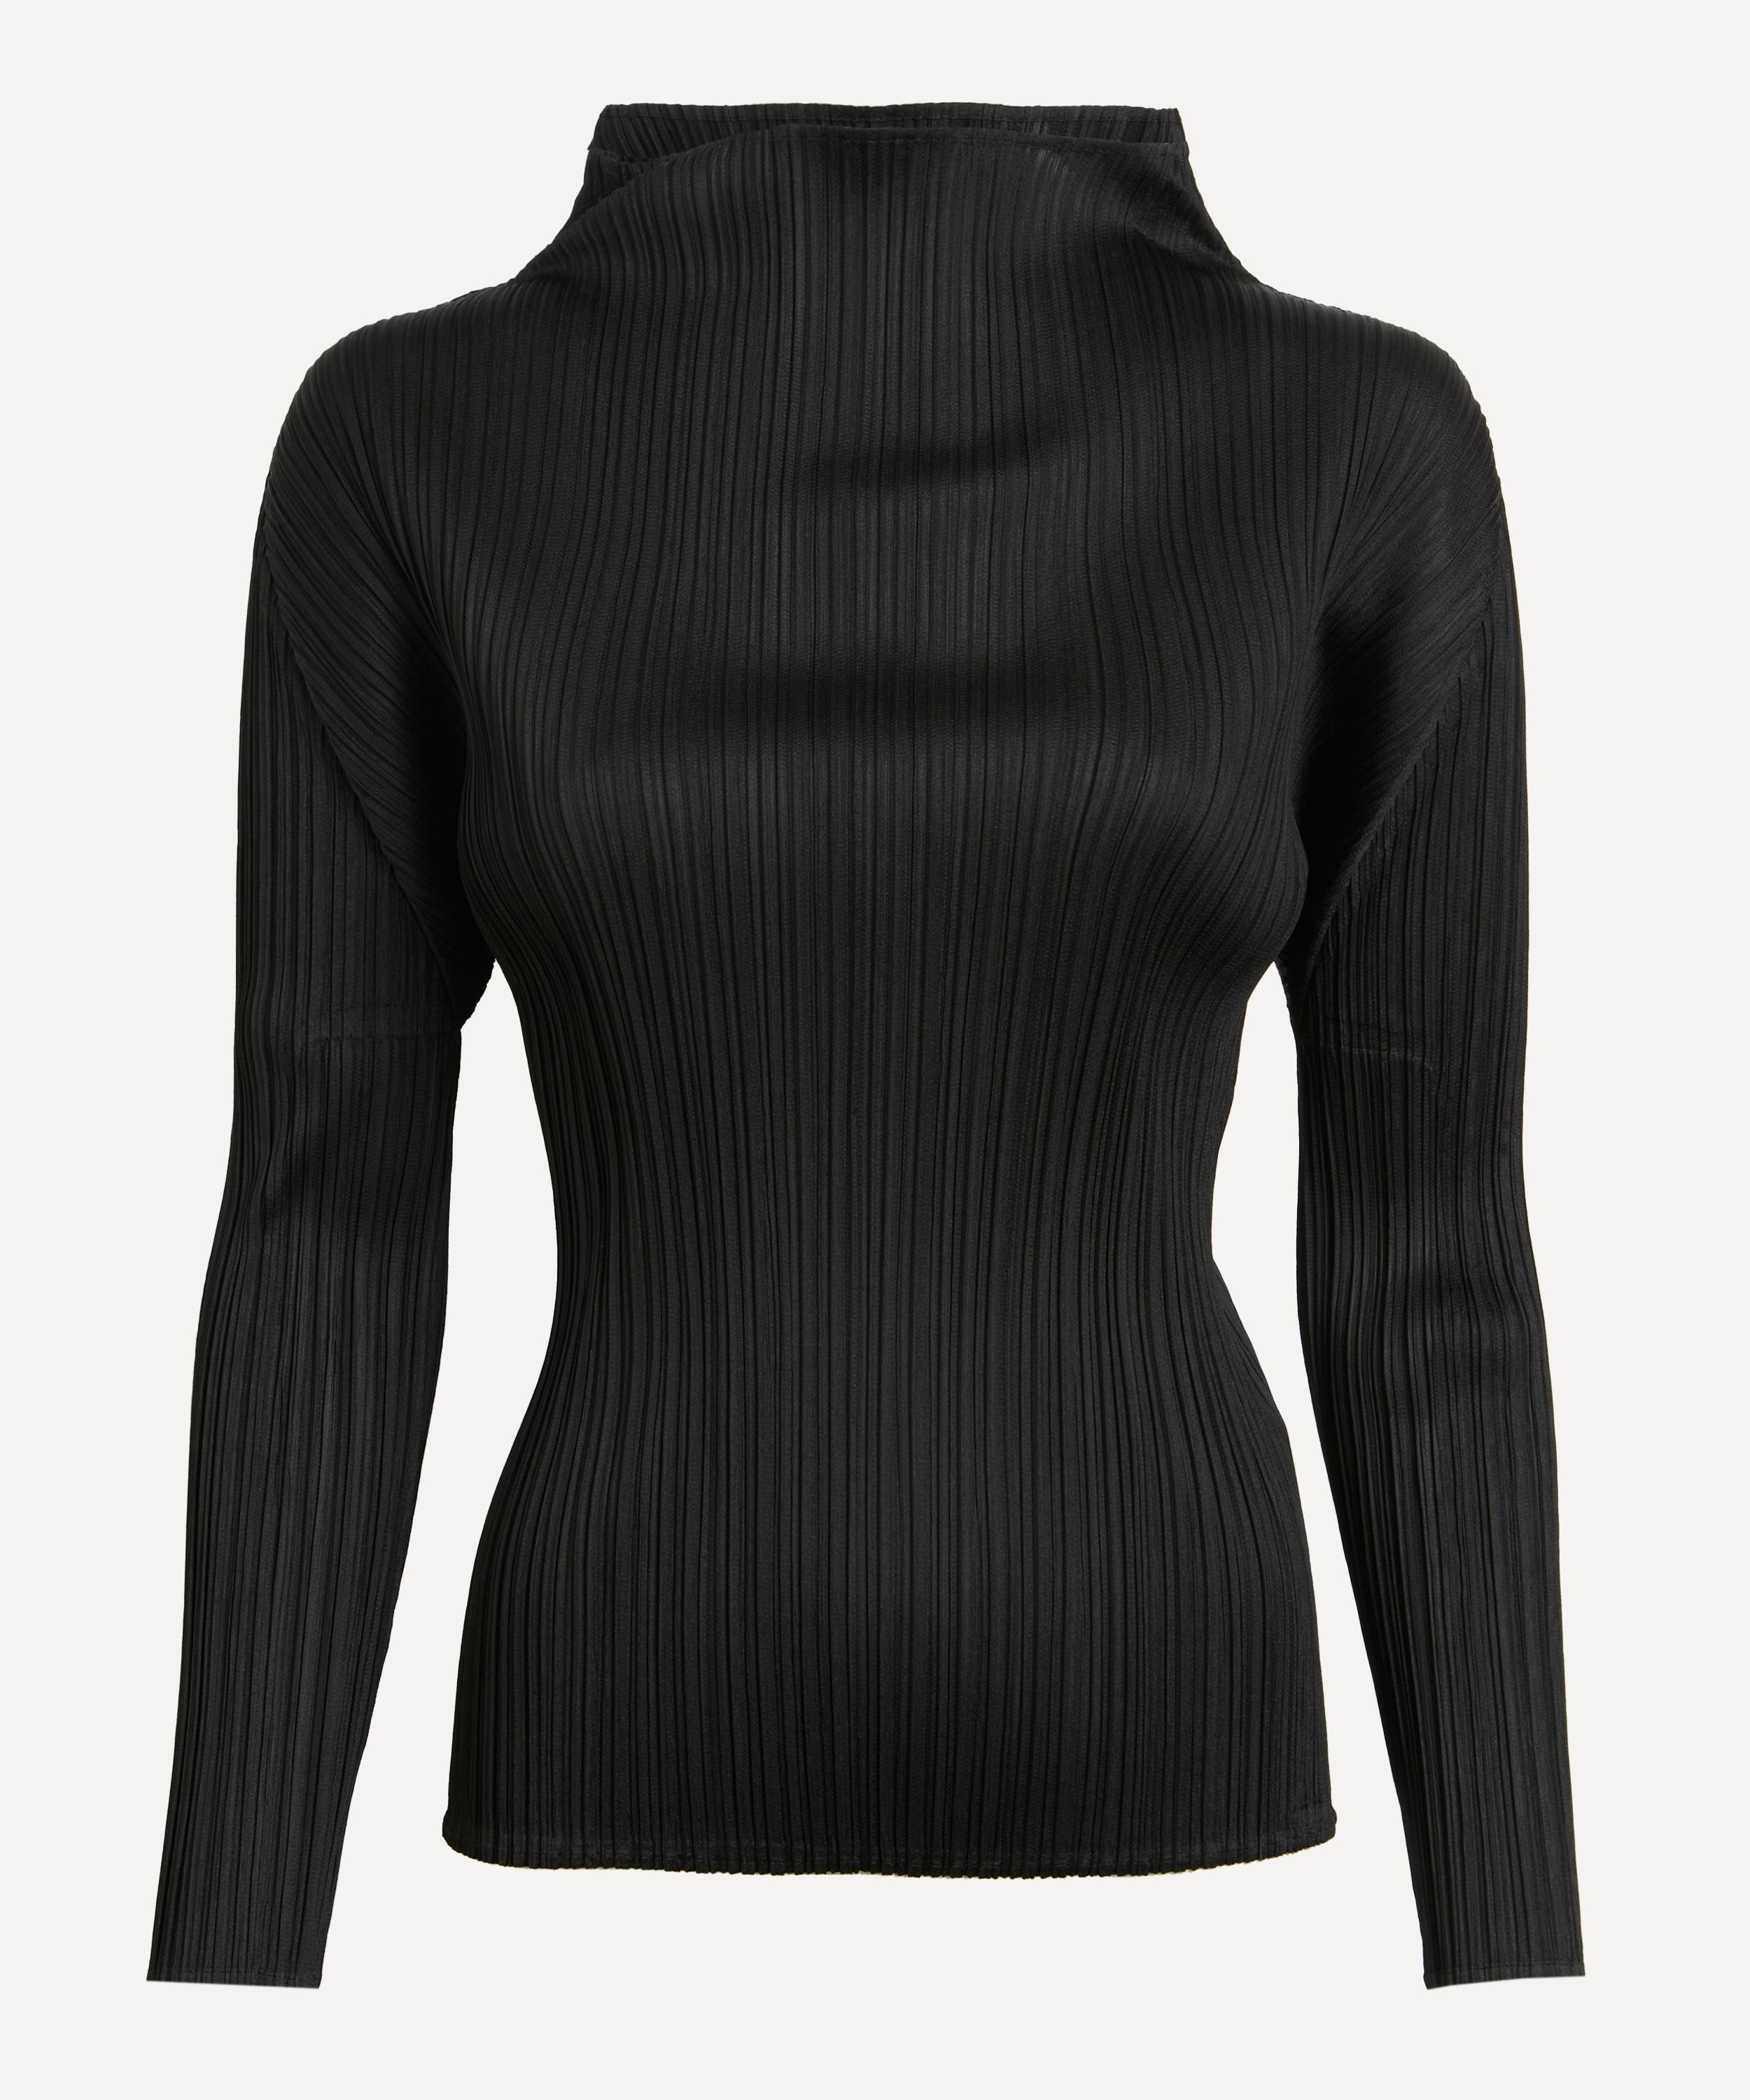 MONTHLY COLOURS NOVEMBER Pleated Black Top - 1